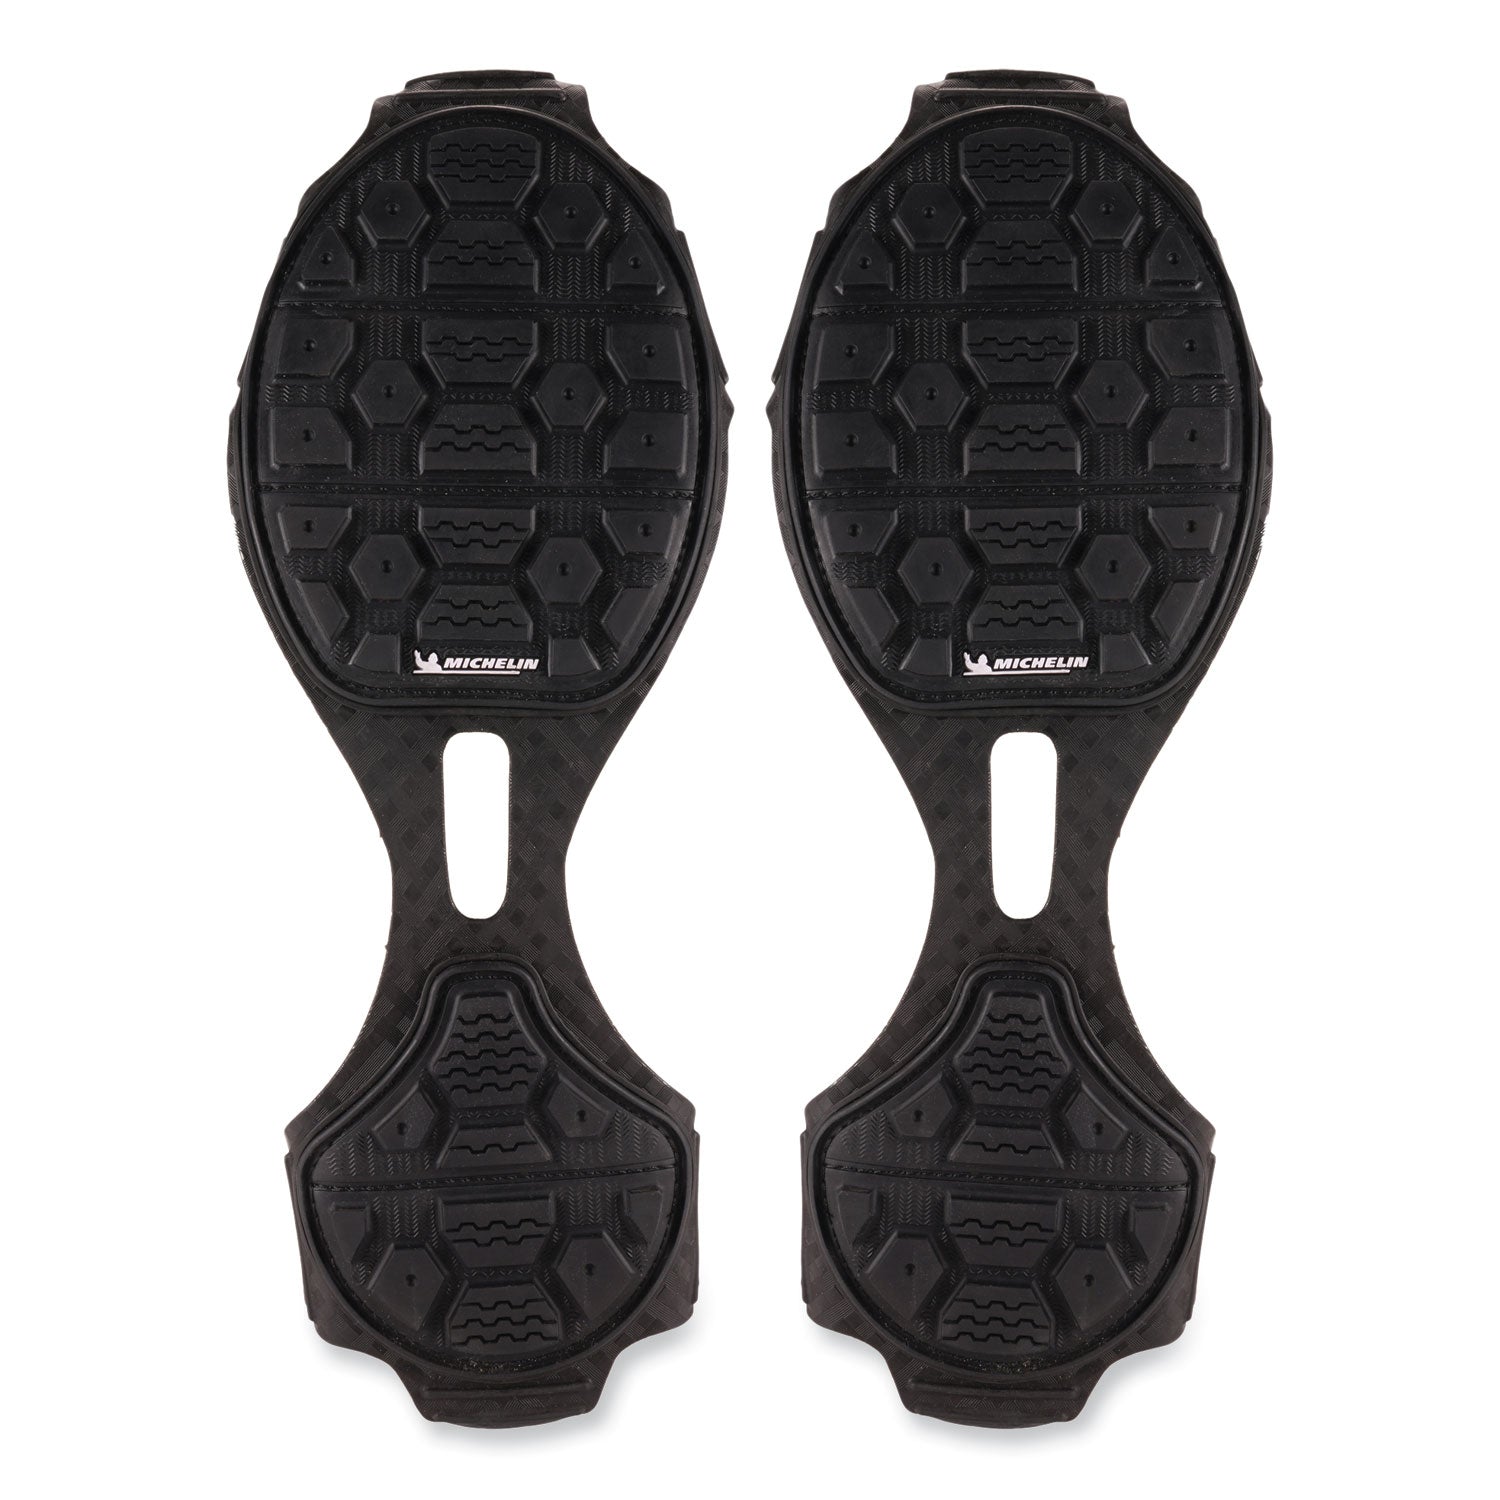 trex-6325-spikeless-traction-devices-x-large-black-pair-ships-in-1-3-business-days_ego16925 - 1